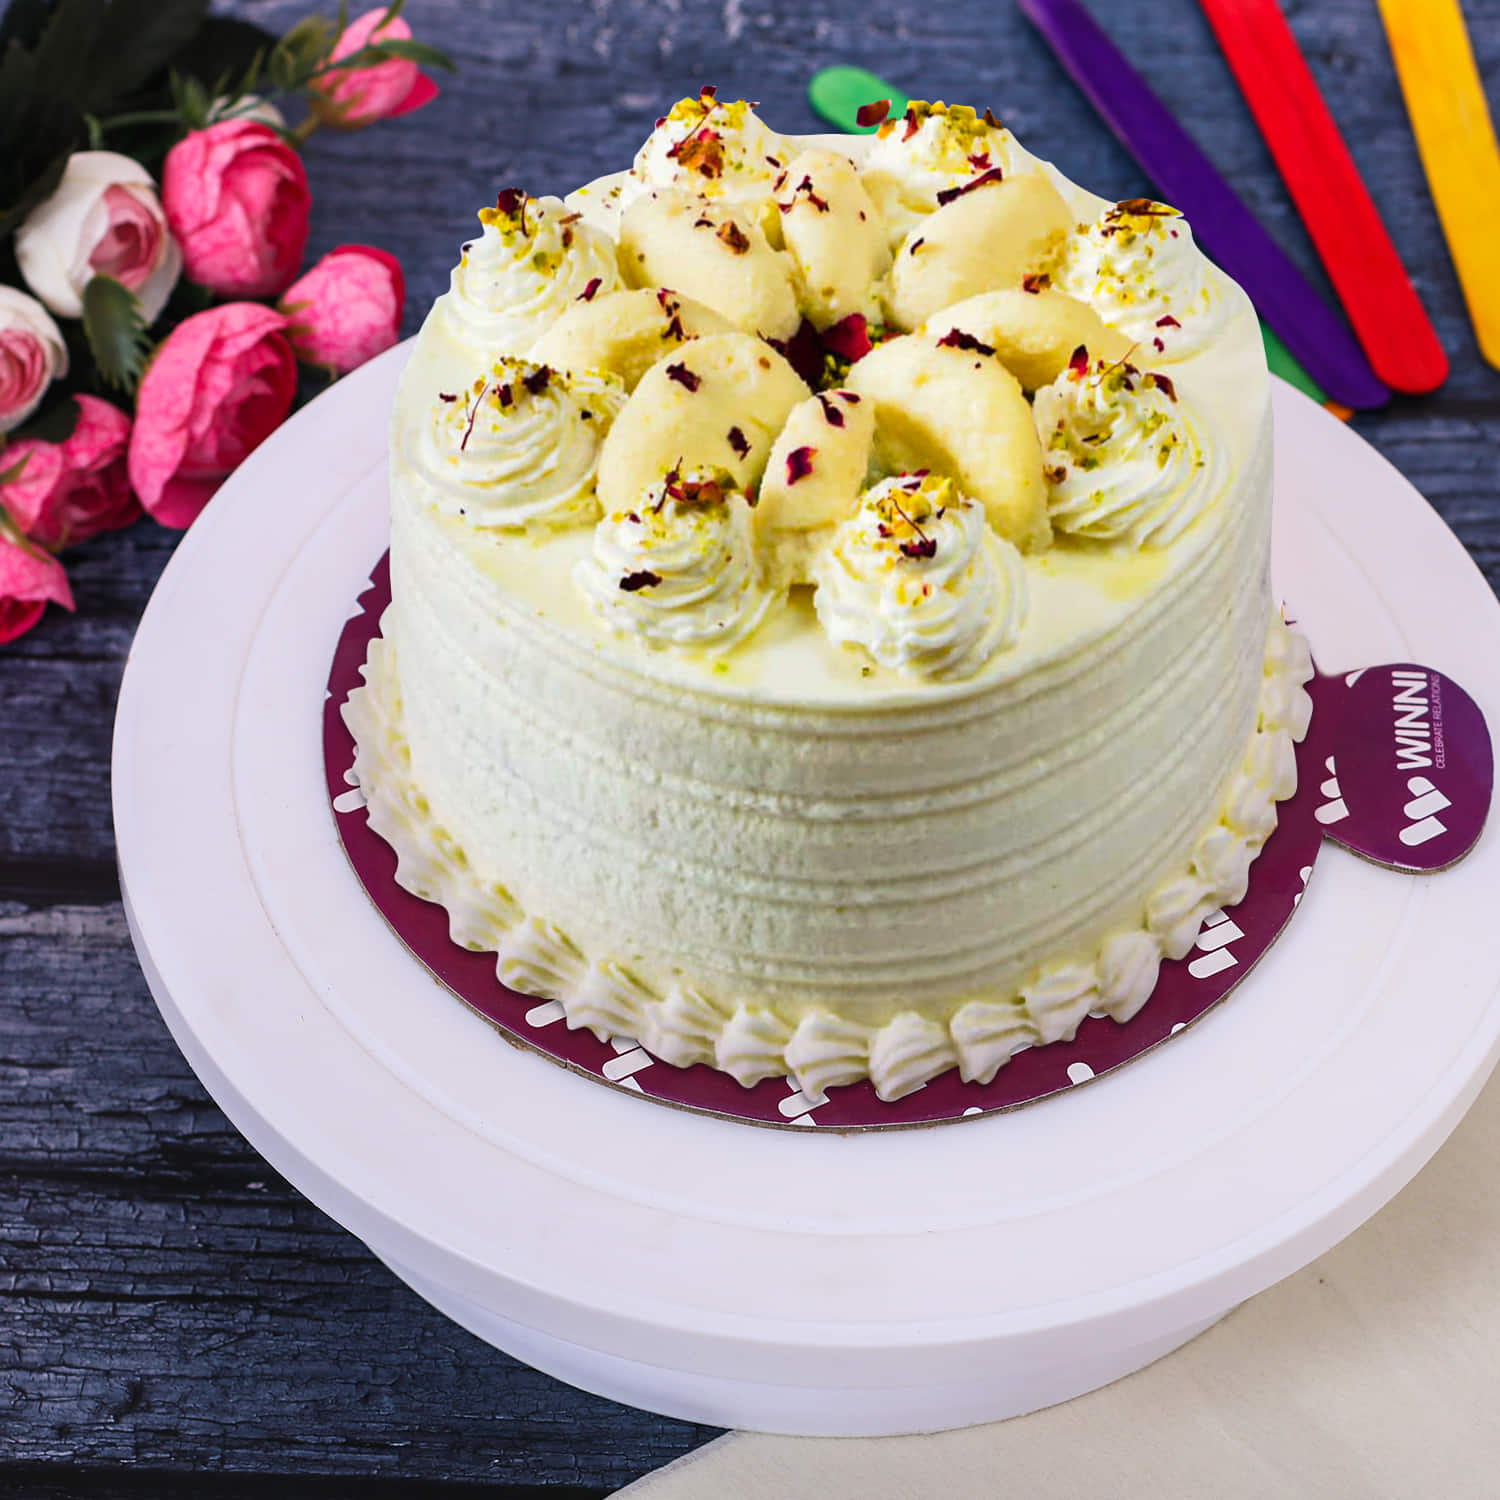 Aggregate 82+ rasmalai cake online delivery latest - awesomeenglish.edu.vn